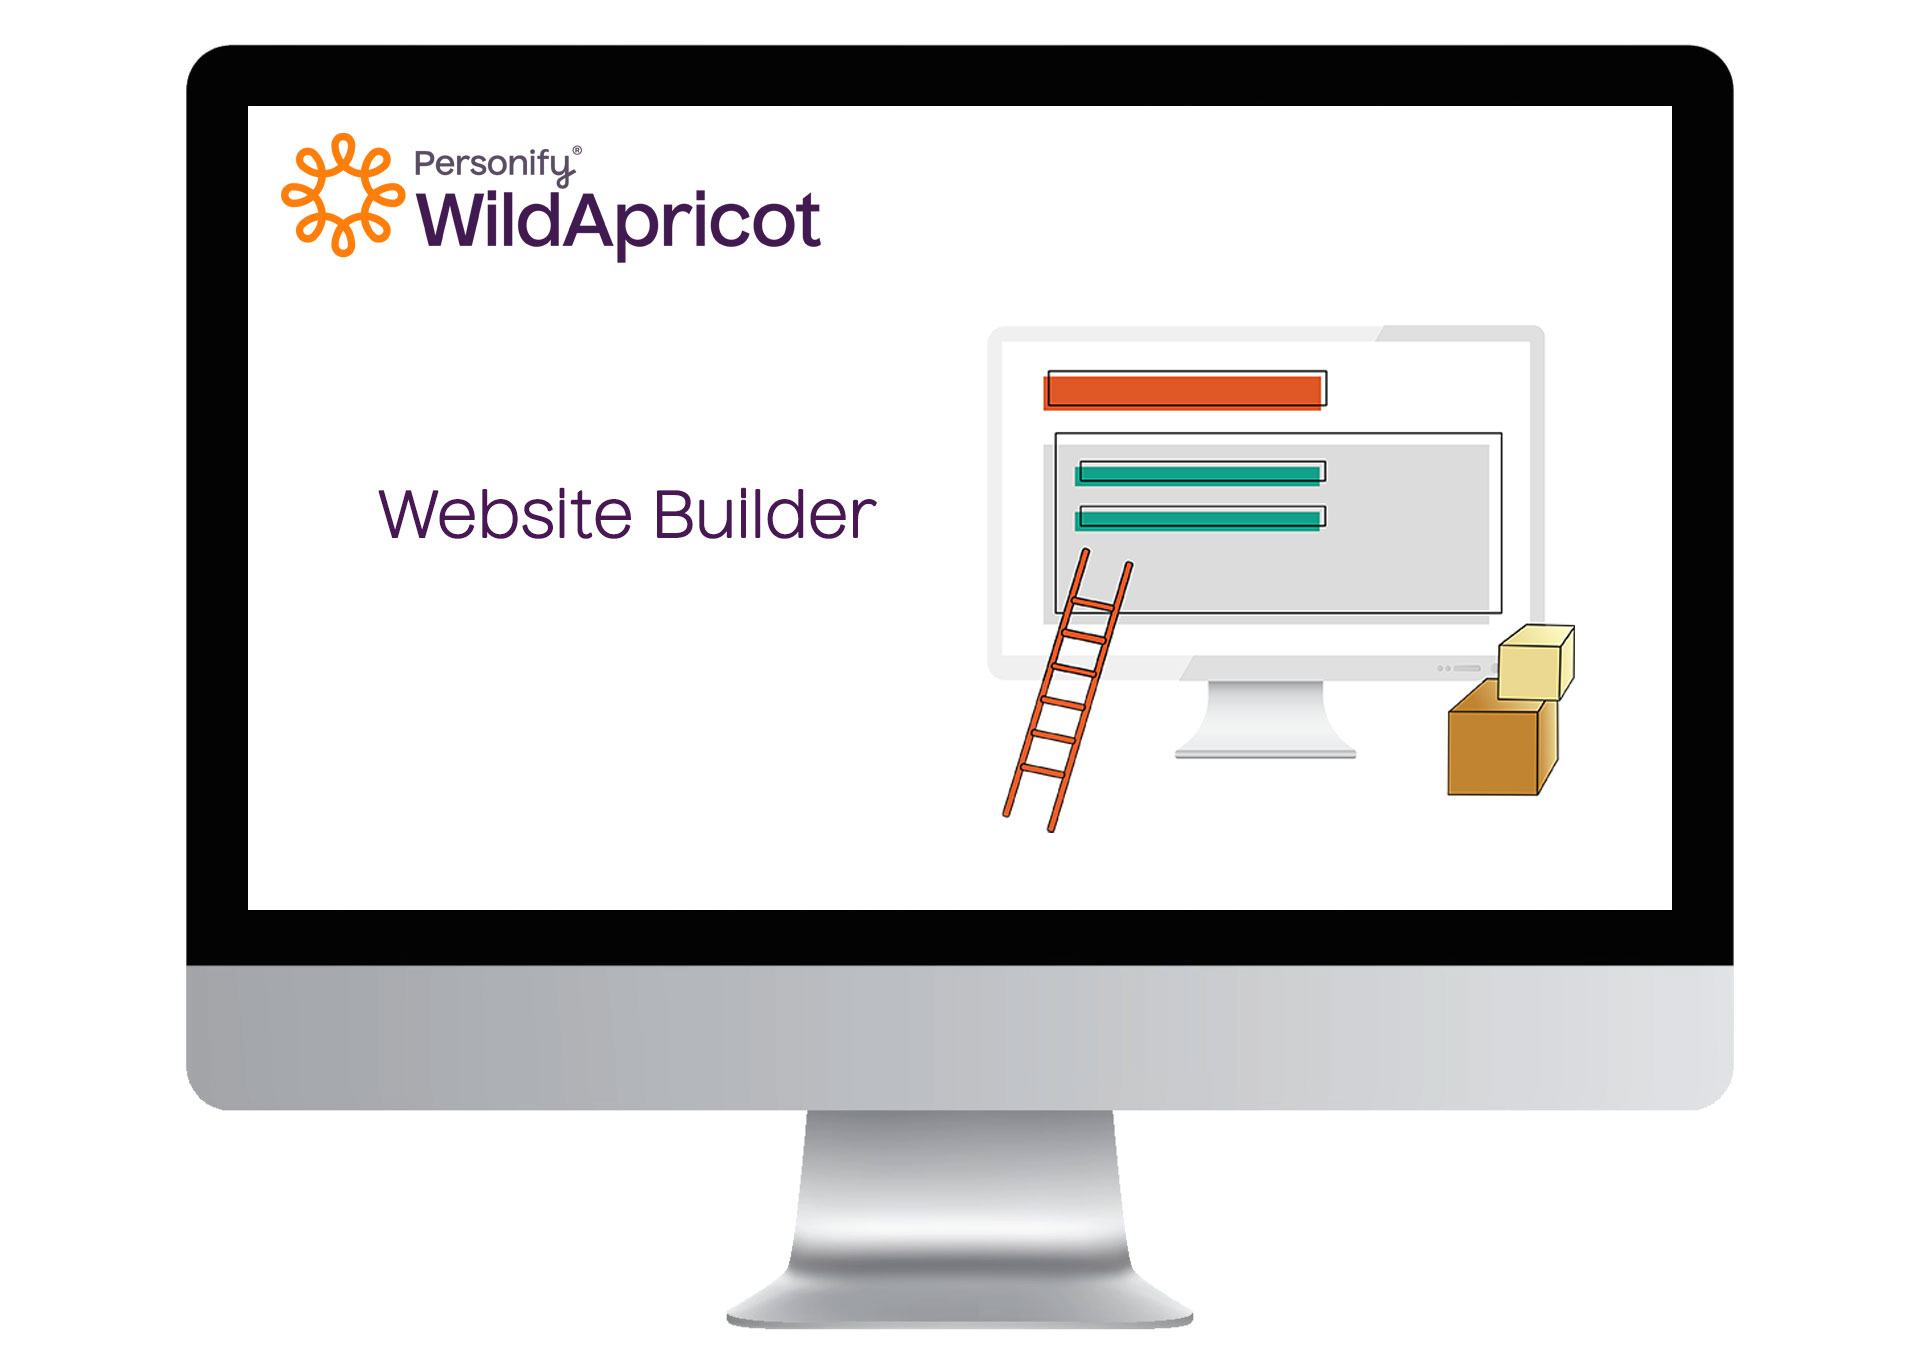 Website Builder: Build a professional looking website using one of our professionally designed and mobile-friendly website templates with your organization's logo and color scheme, then add your own text and images.